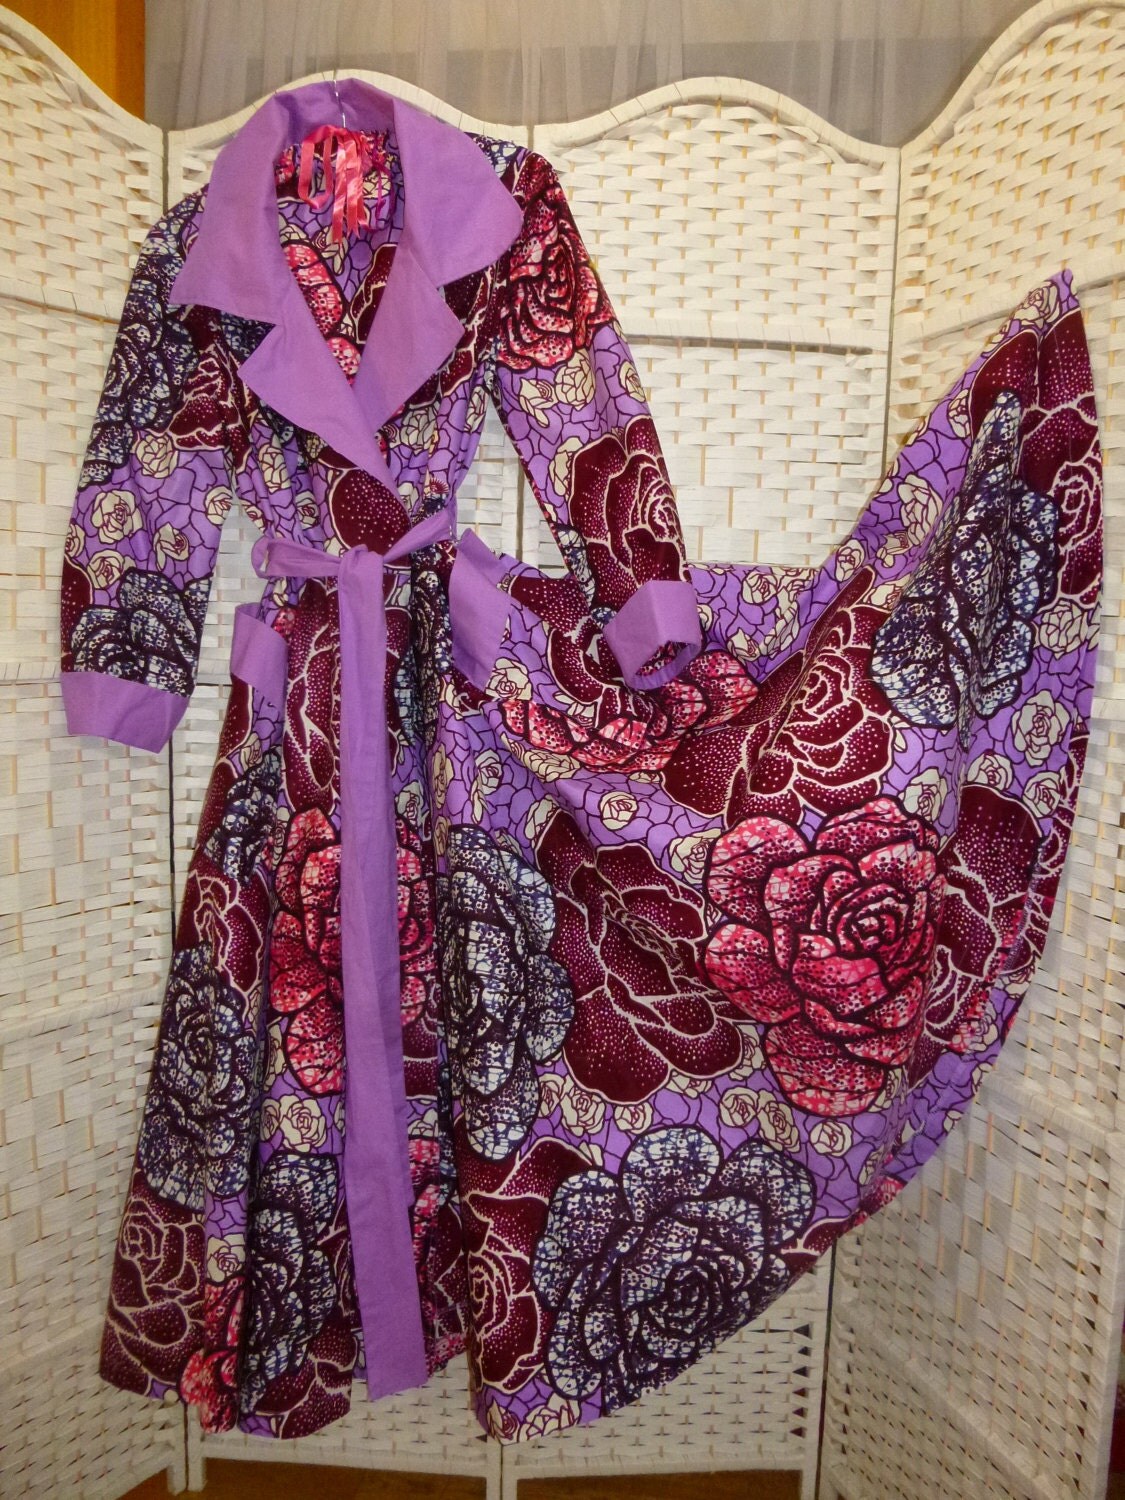 Vintage style Dior New Look Robe. I Love Lucy. Retro